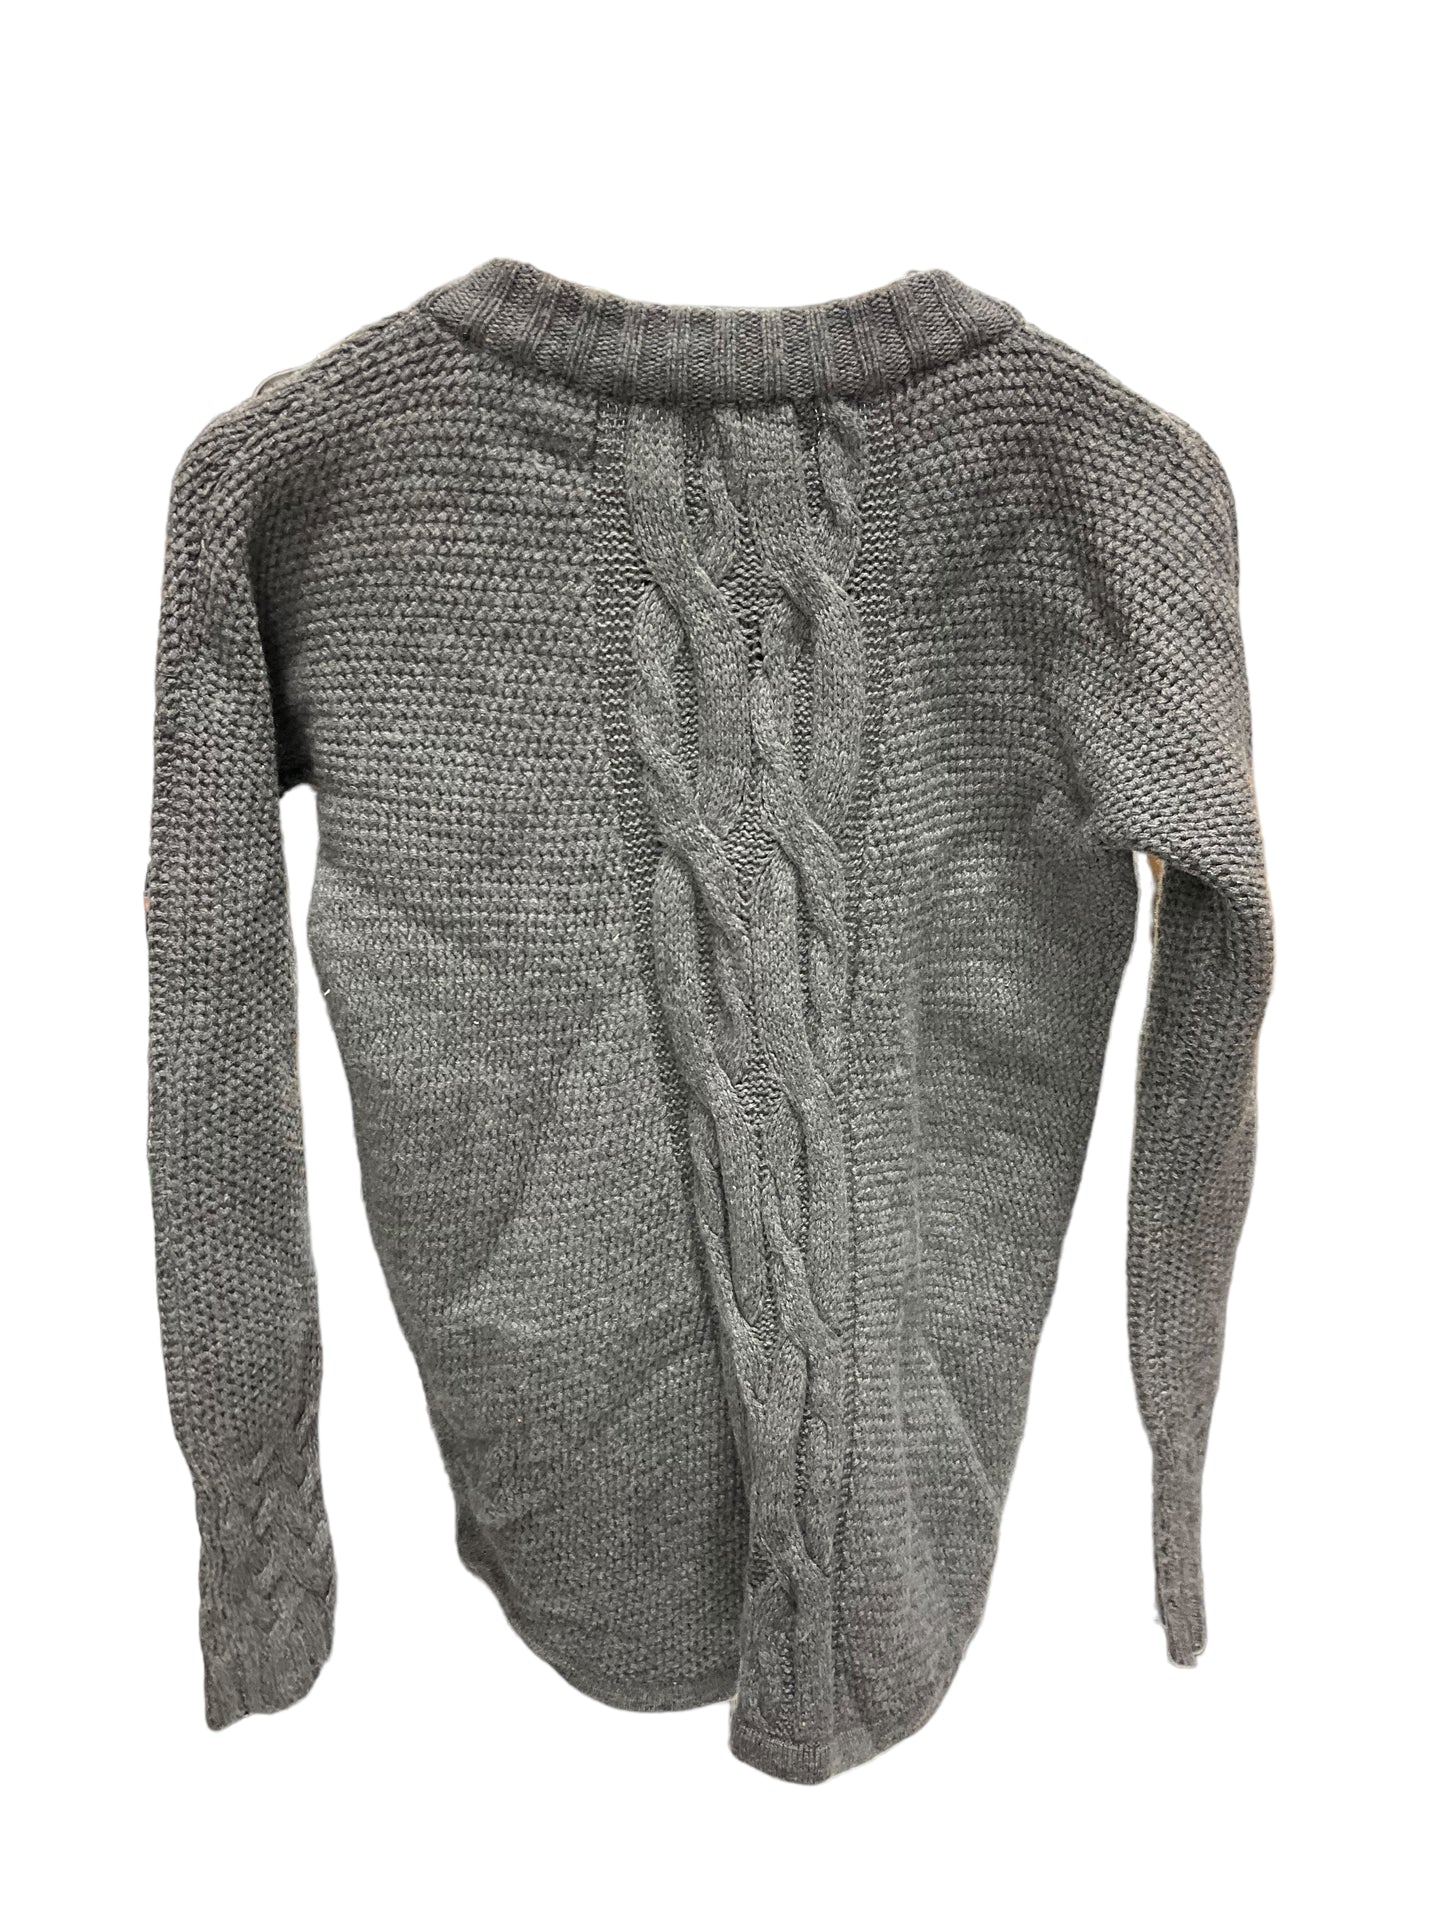 Sweater Cardigan Cashmere By Cma  Size: S